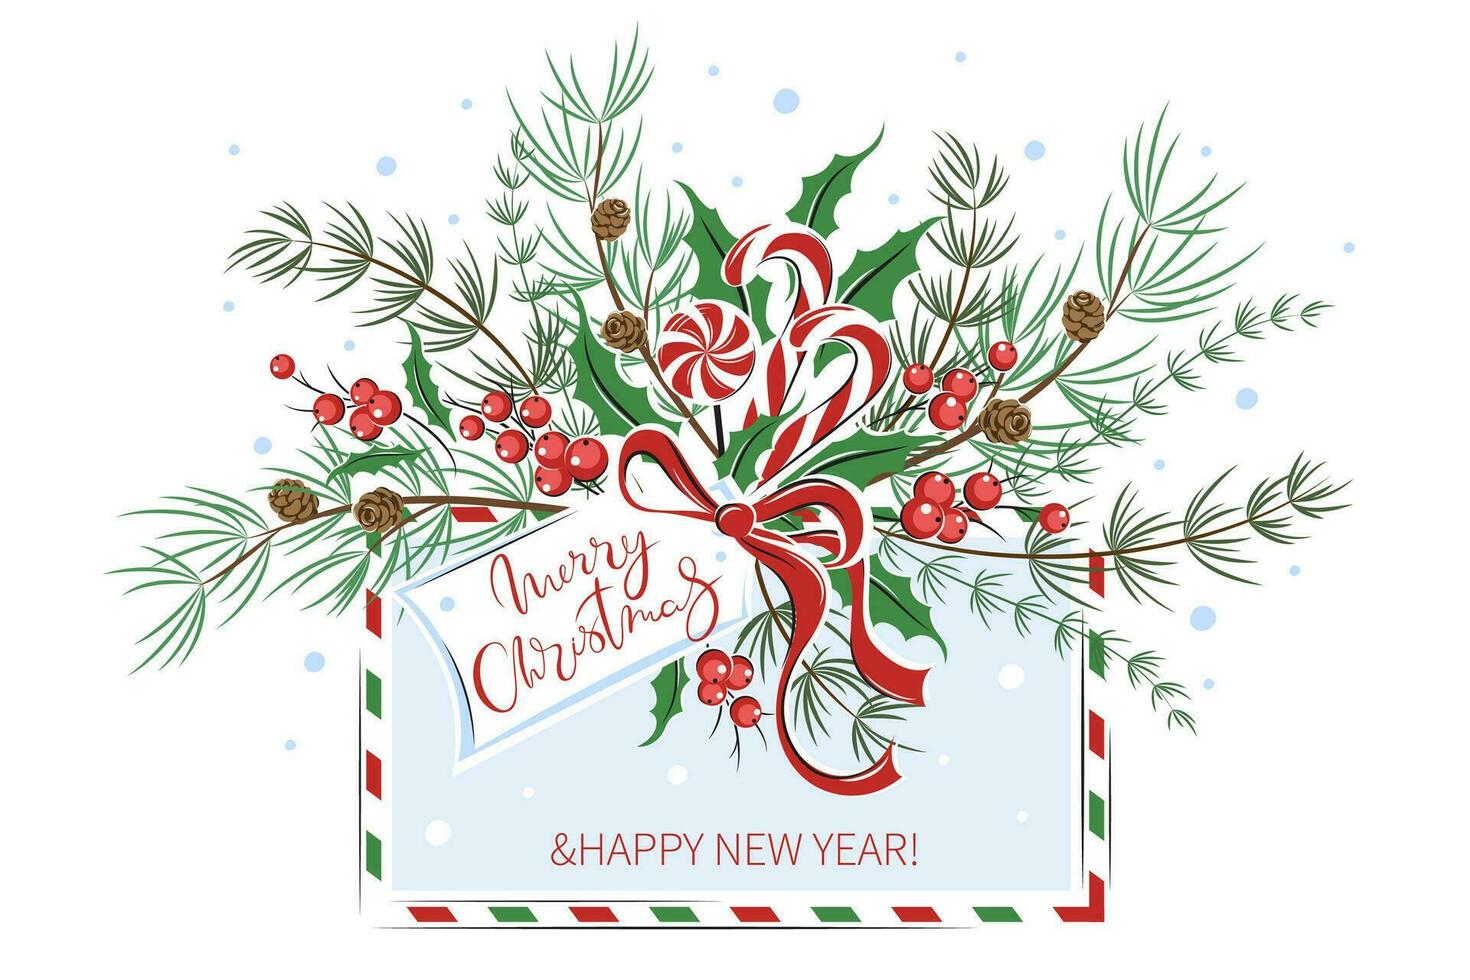 Merry Christmas and a happy new year. Card with with envelope, traditional candies  and decorations. Winter holidays design elements for background, banners or posters. Vector illustration